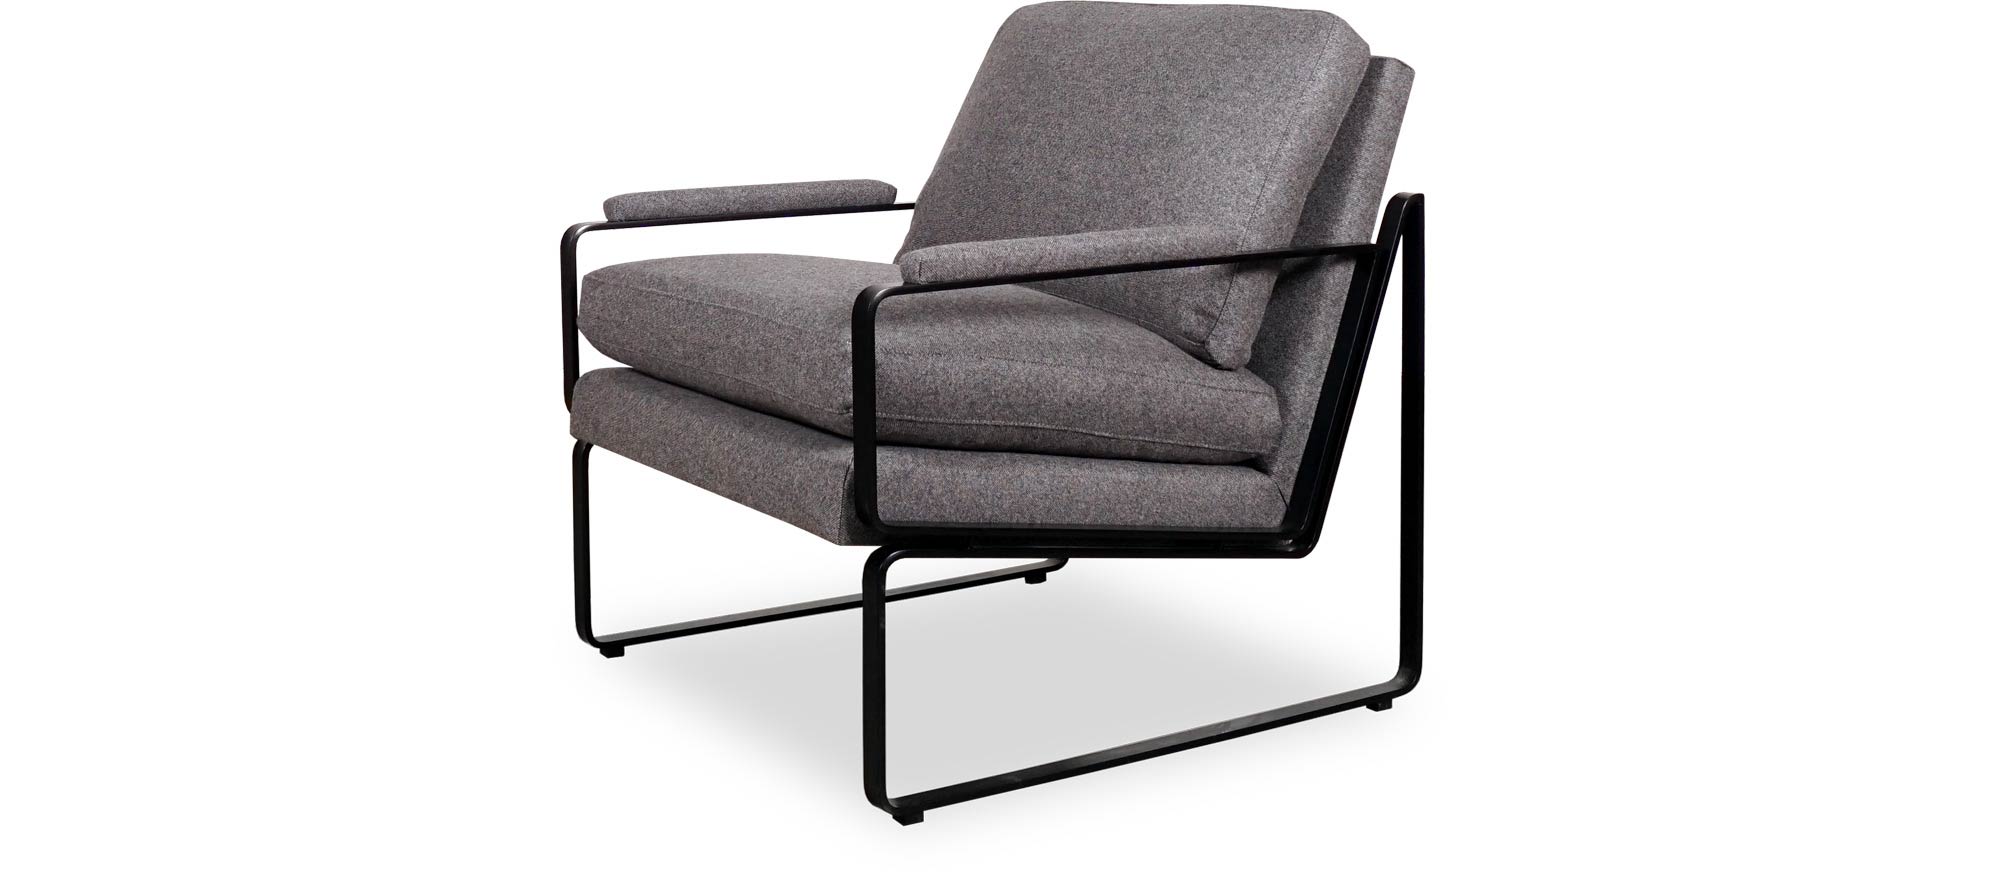 Weldon armchair in Harrison Wool Tweed and black metal finish with cushion back and seat